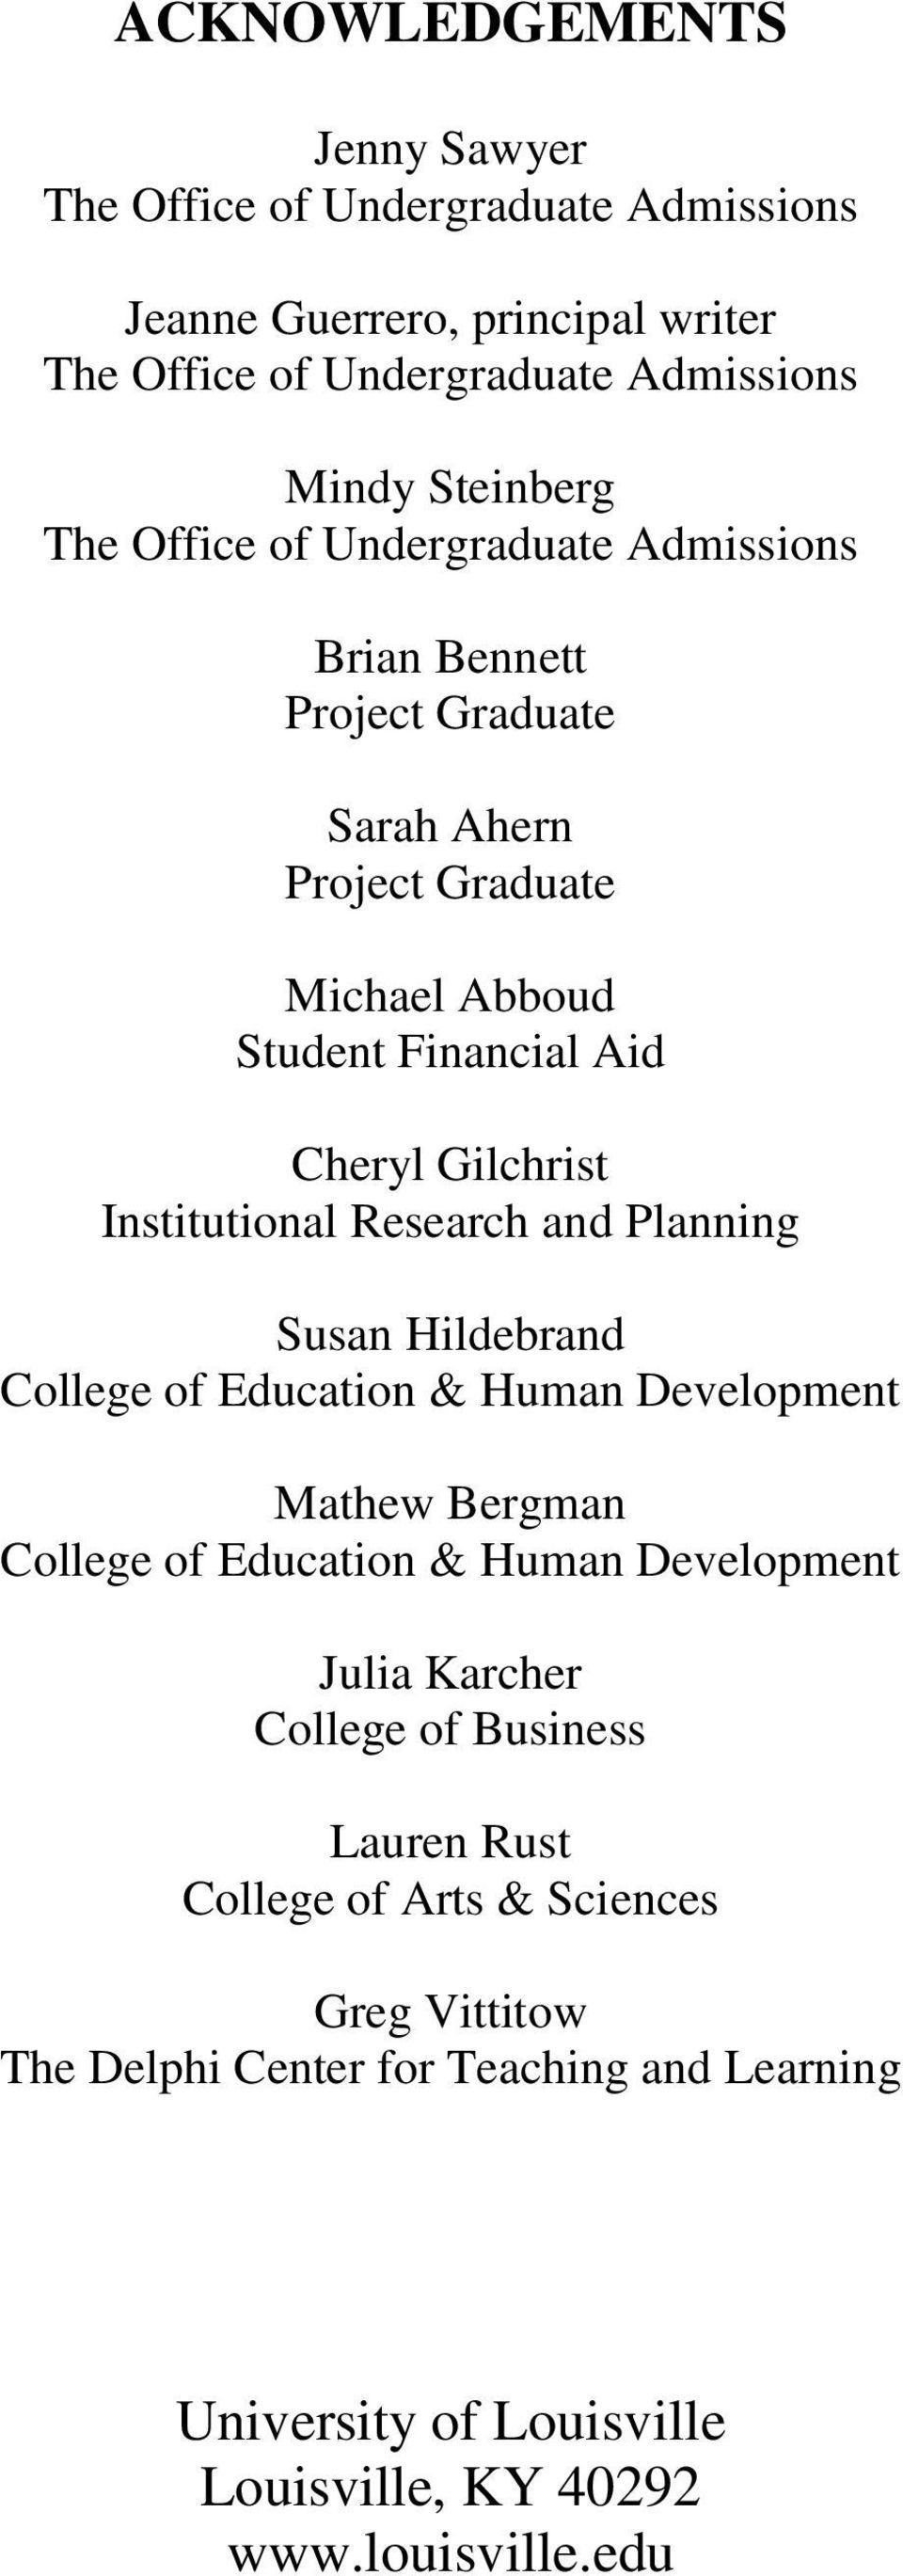 Research and Planning Susan Hildebrand College of Education & Human Development Mathew Bergman College of Education & Human Development Julia Karcher College of